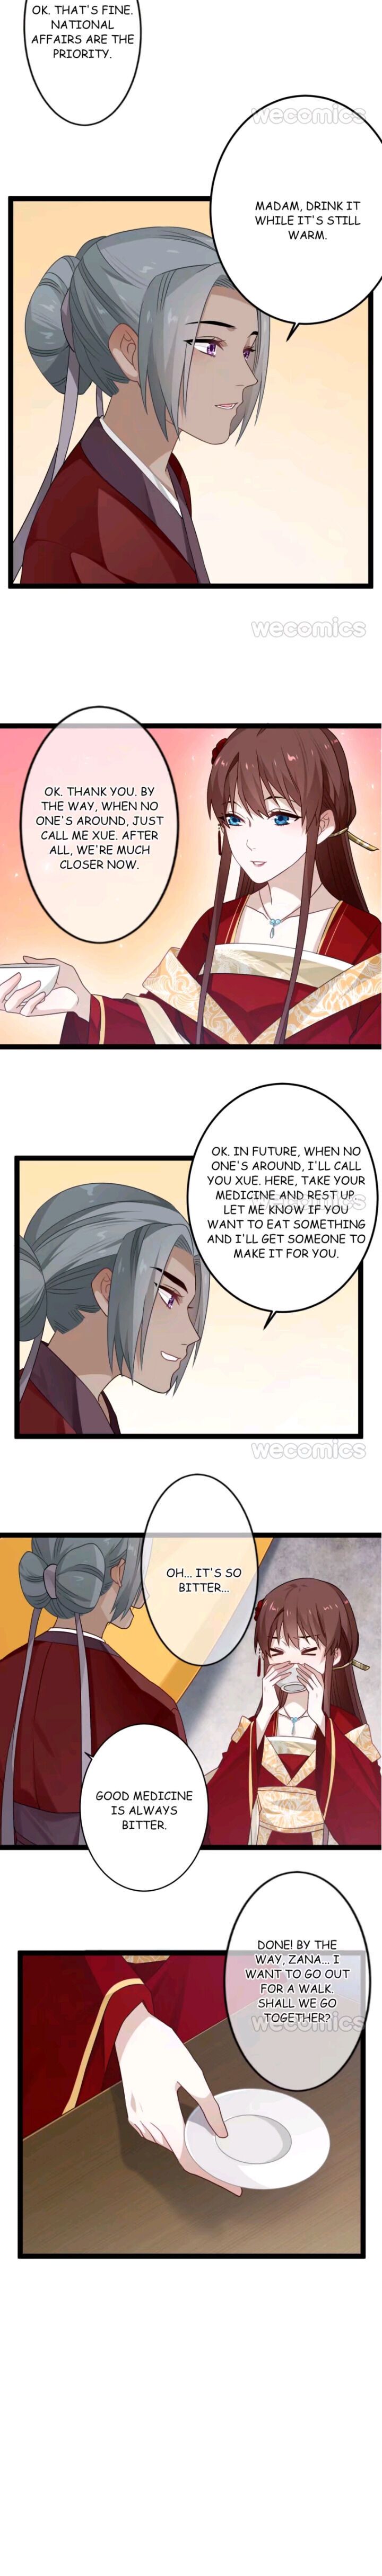 Curse of Loulan: The Tyrant Bestows Favor on Me Chapter 90 page 20